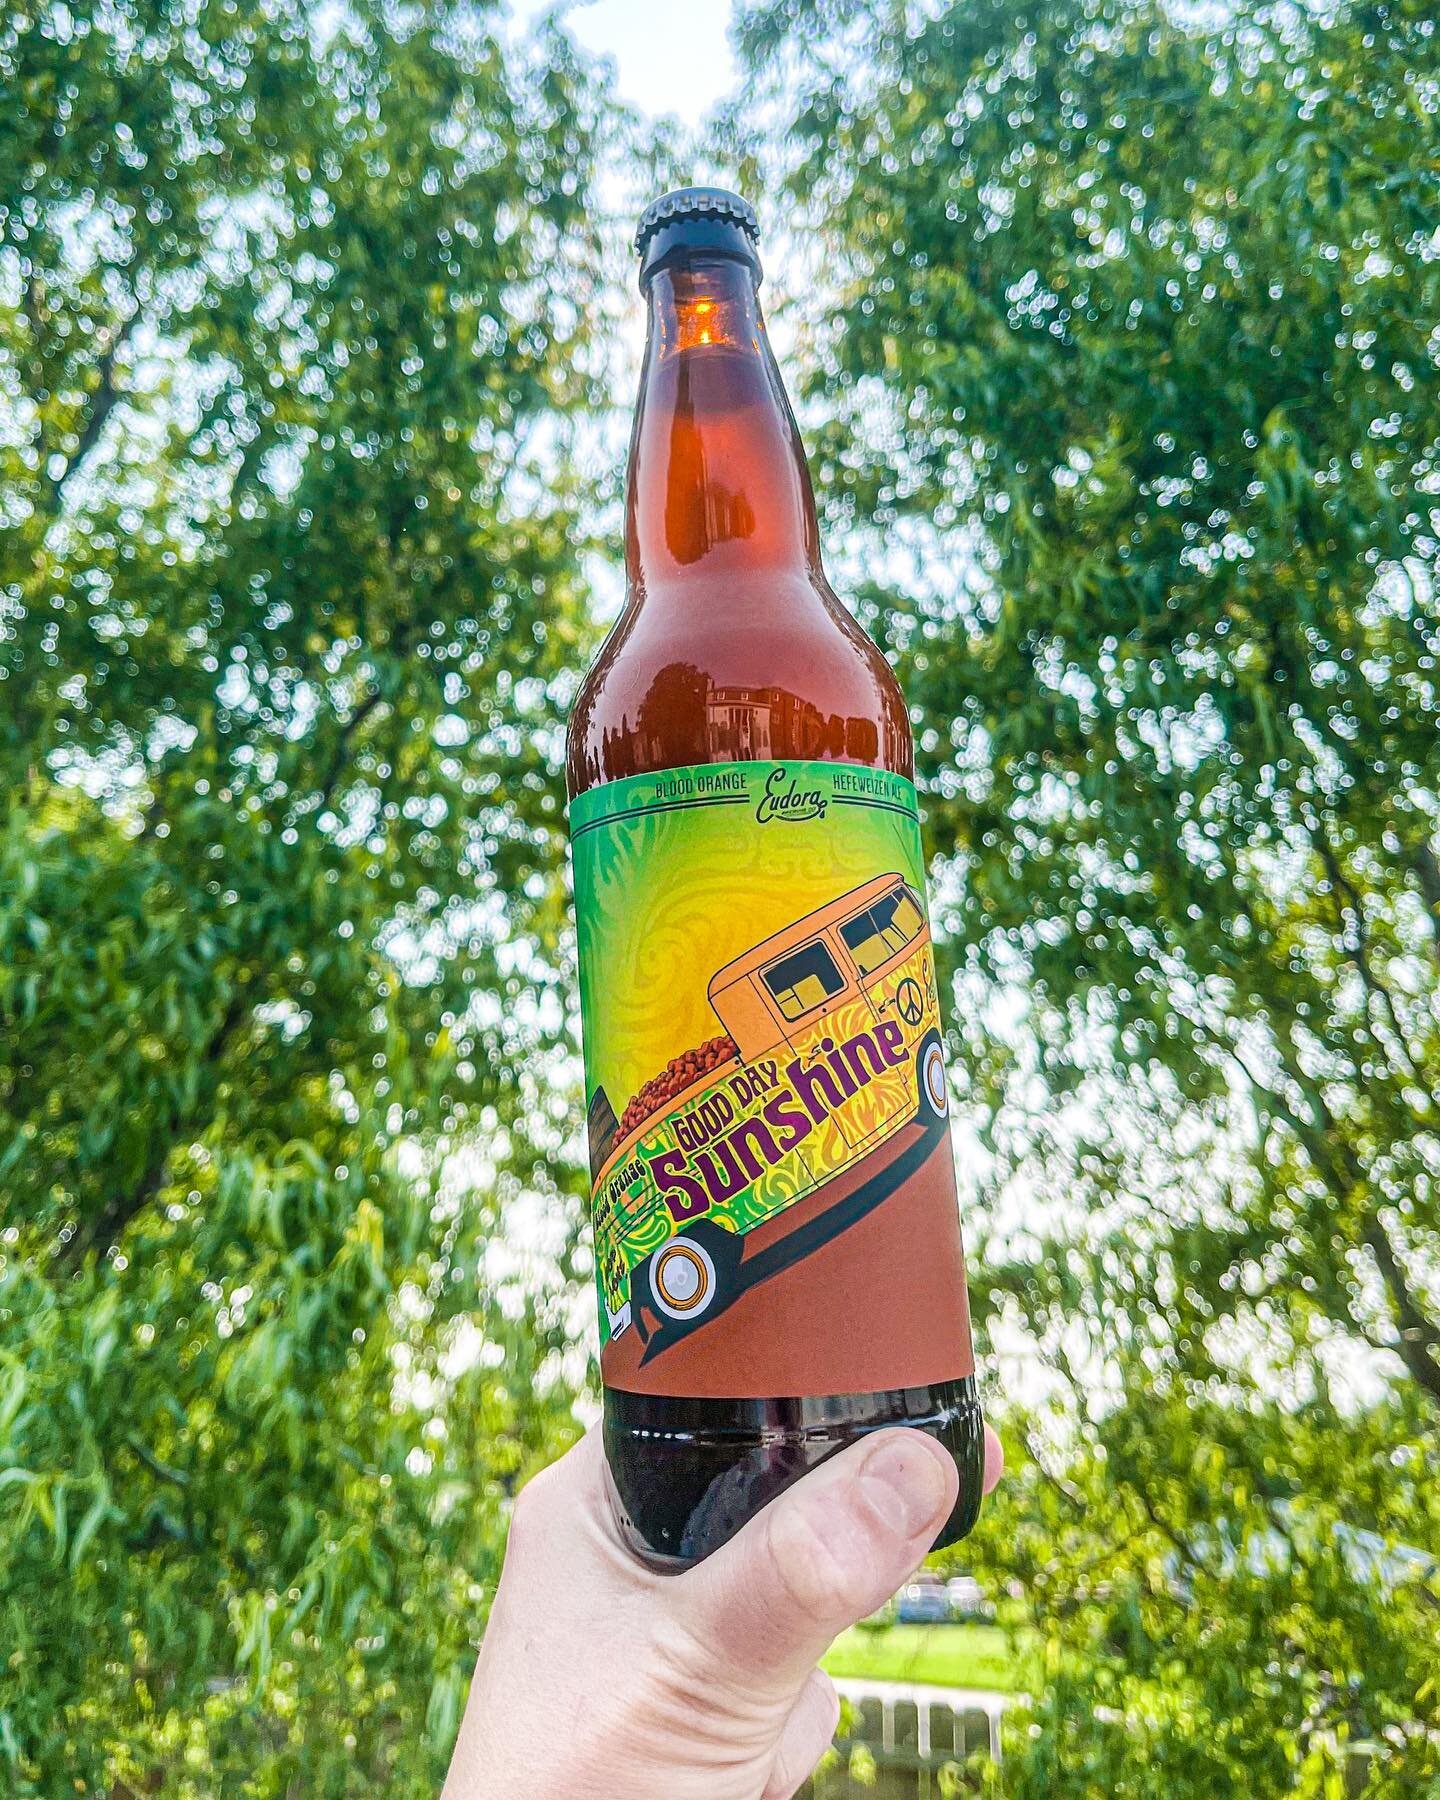 So you want to enjoy your Blood Orange Good Day Sunshine in the sun? Why not do it on our patio???

We still have a coupe cases of this springtime sipper left for take-home or taproom enjoyment! 🍊 🍻 #brewgoodness #daytonbeer